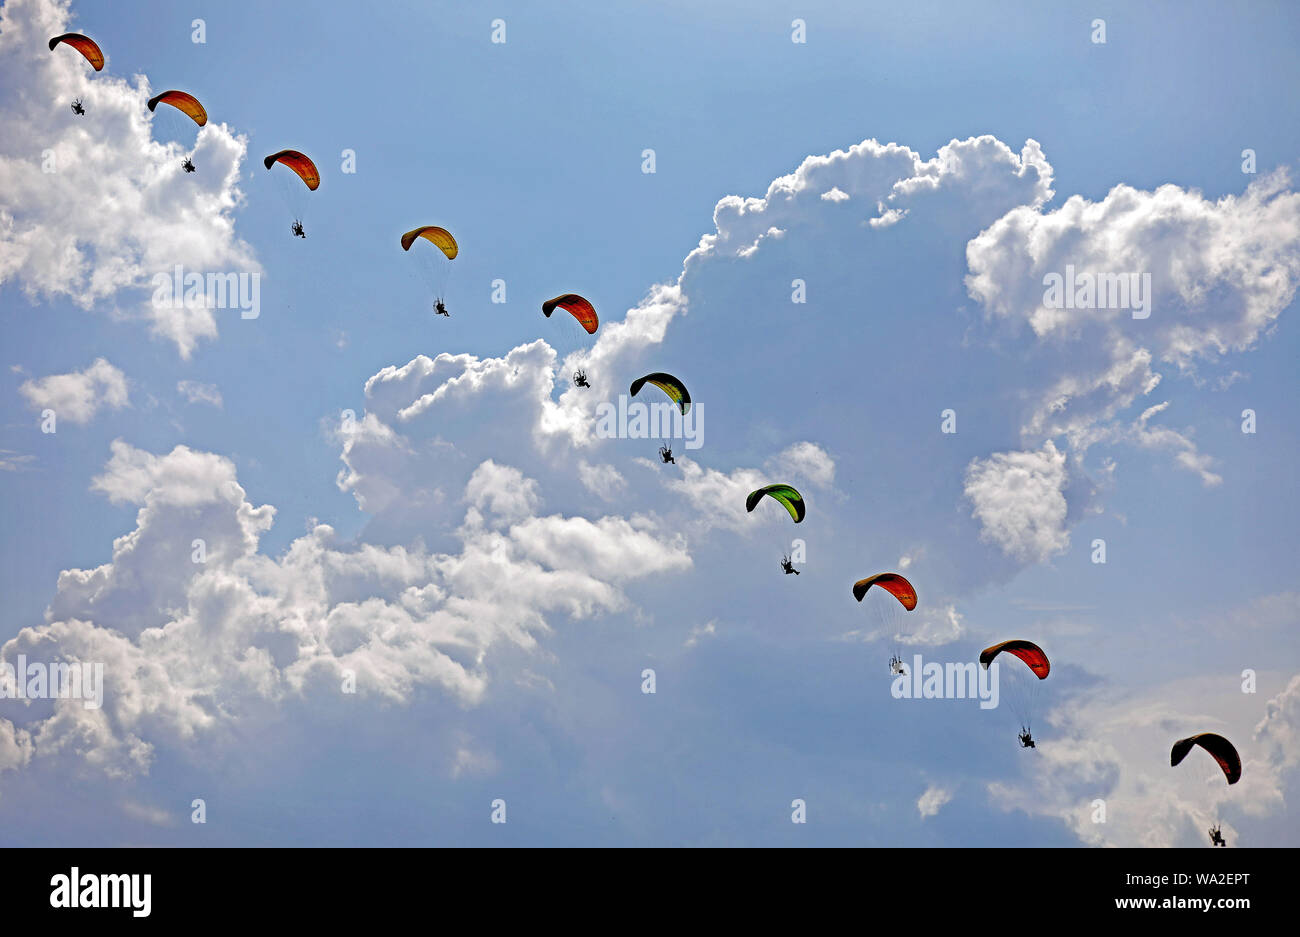 Beijing, China. 16th Aug, 2019. Photo taken on Aug. 16, 2019 shows paramotor performance during the 8th Faku Flight International Conference in Shenyang, capital of northeast China's Liaoning Province. Credit: Yao Jianfeng/Xinhua/Alamy Live News Stock Photo